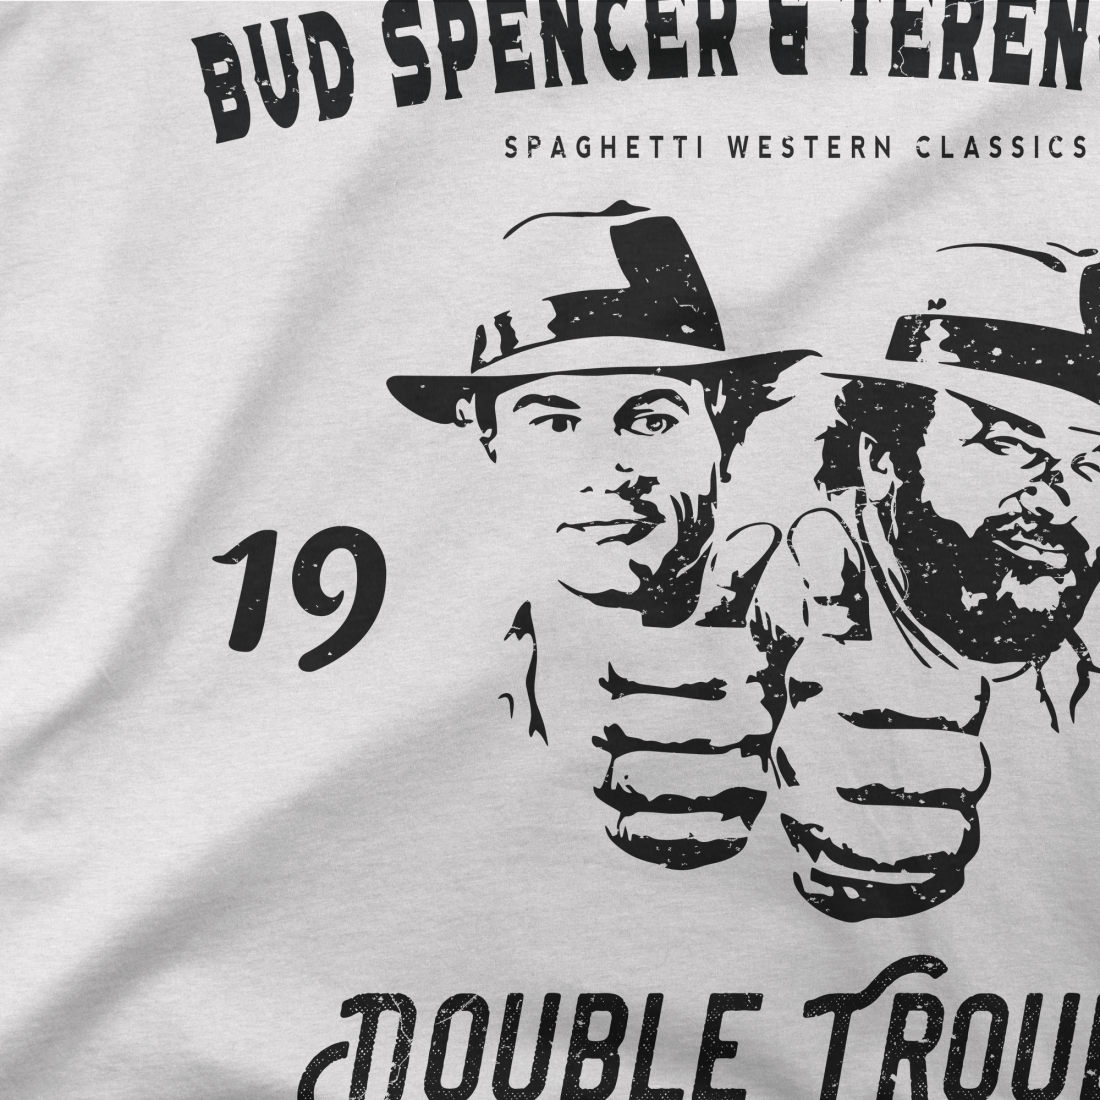 Terence Hill Bud Spencer - Old School Legends - T-Shirt (Weiss)